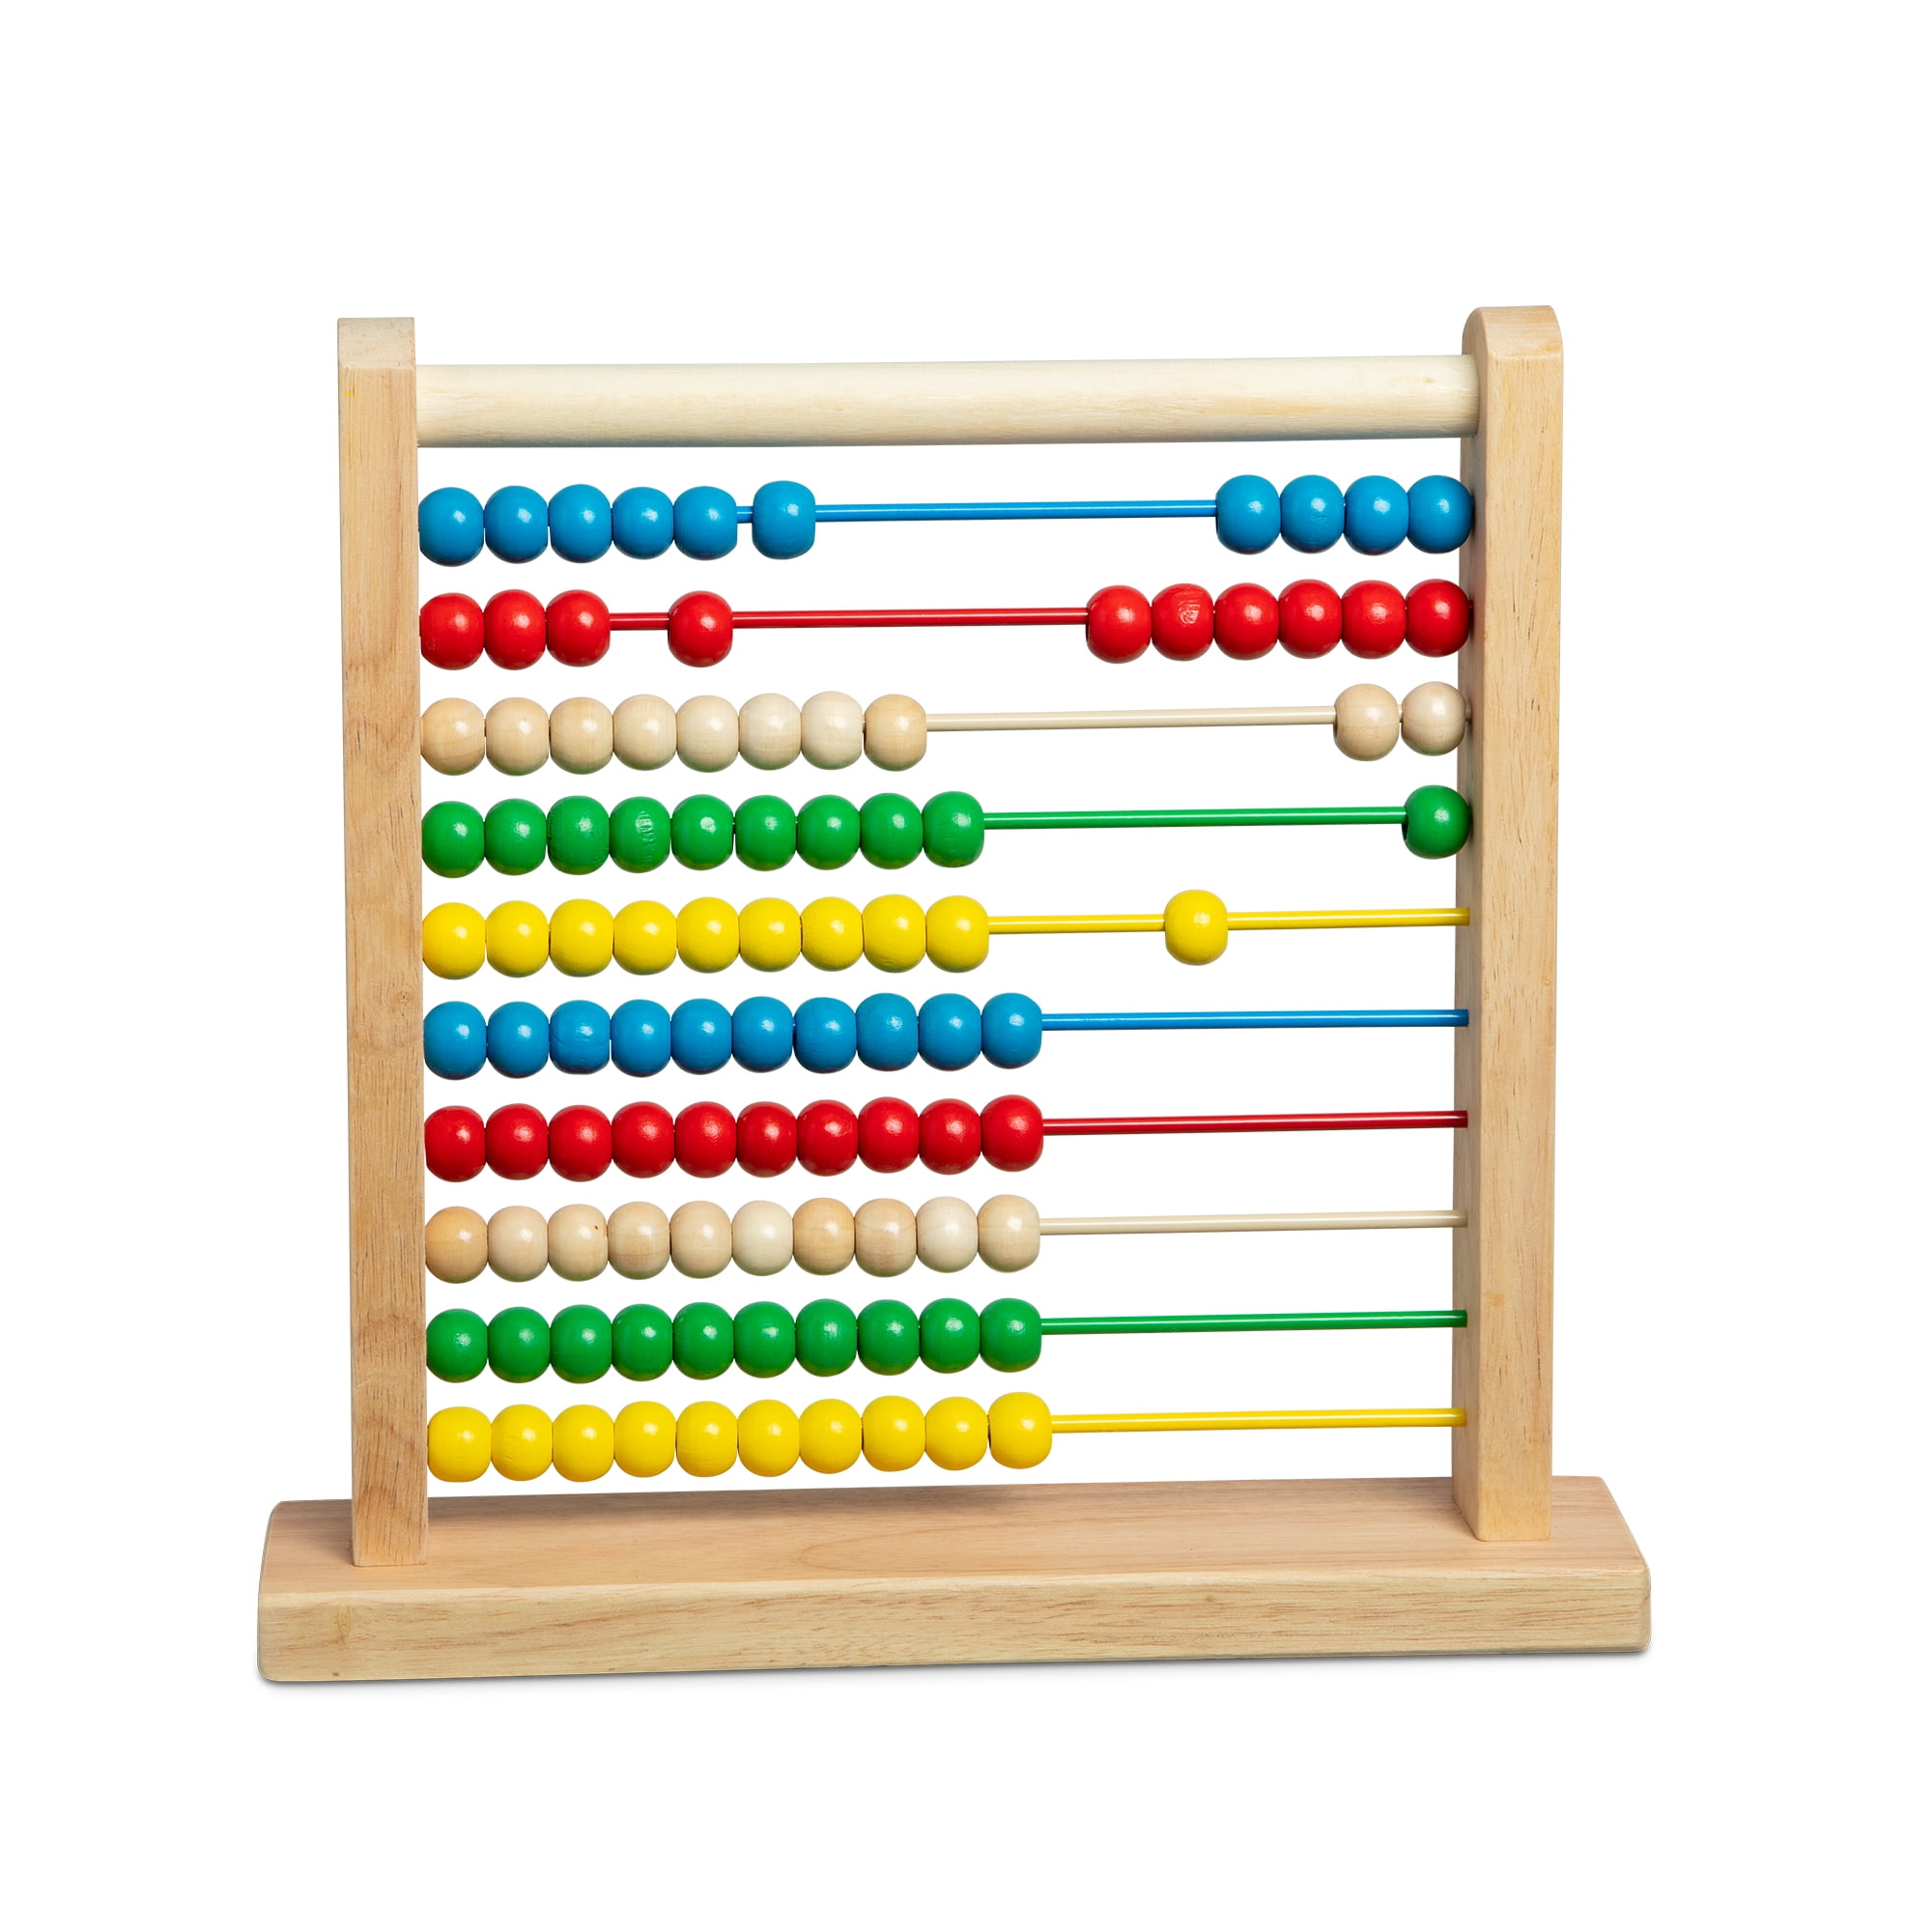 Classic Wooden Educational Counting Toy With 100 Beads Melissa & Doug Abacus 